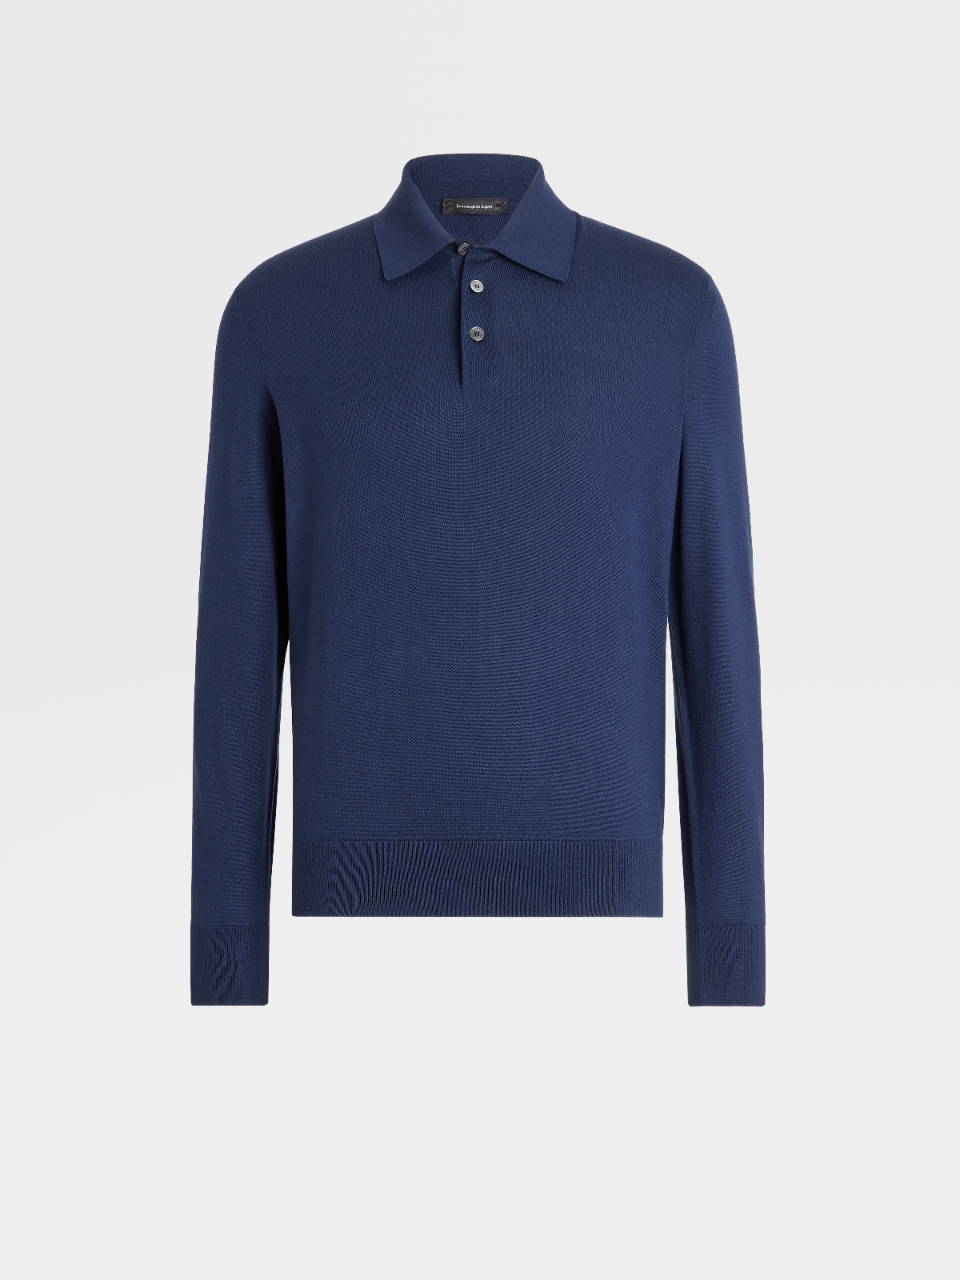 Ink Blue Island Cotton and Cashmere Knit Long-sleeve Polo